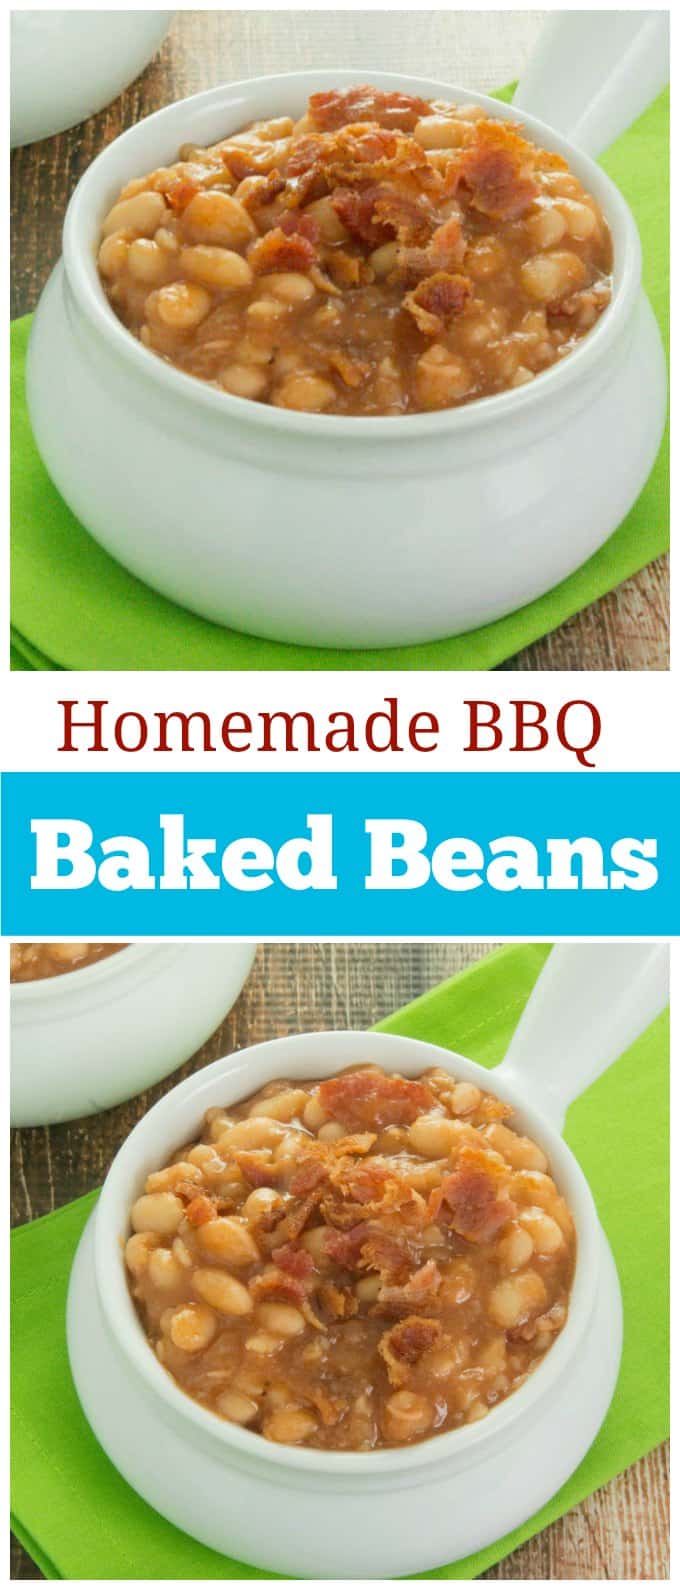 Homemade BBQ Baked Beans Collage